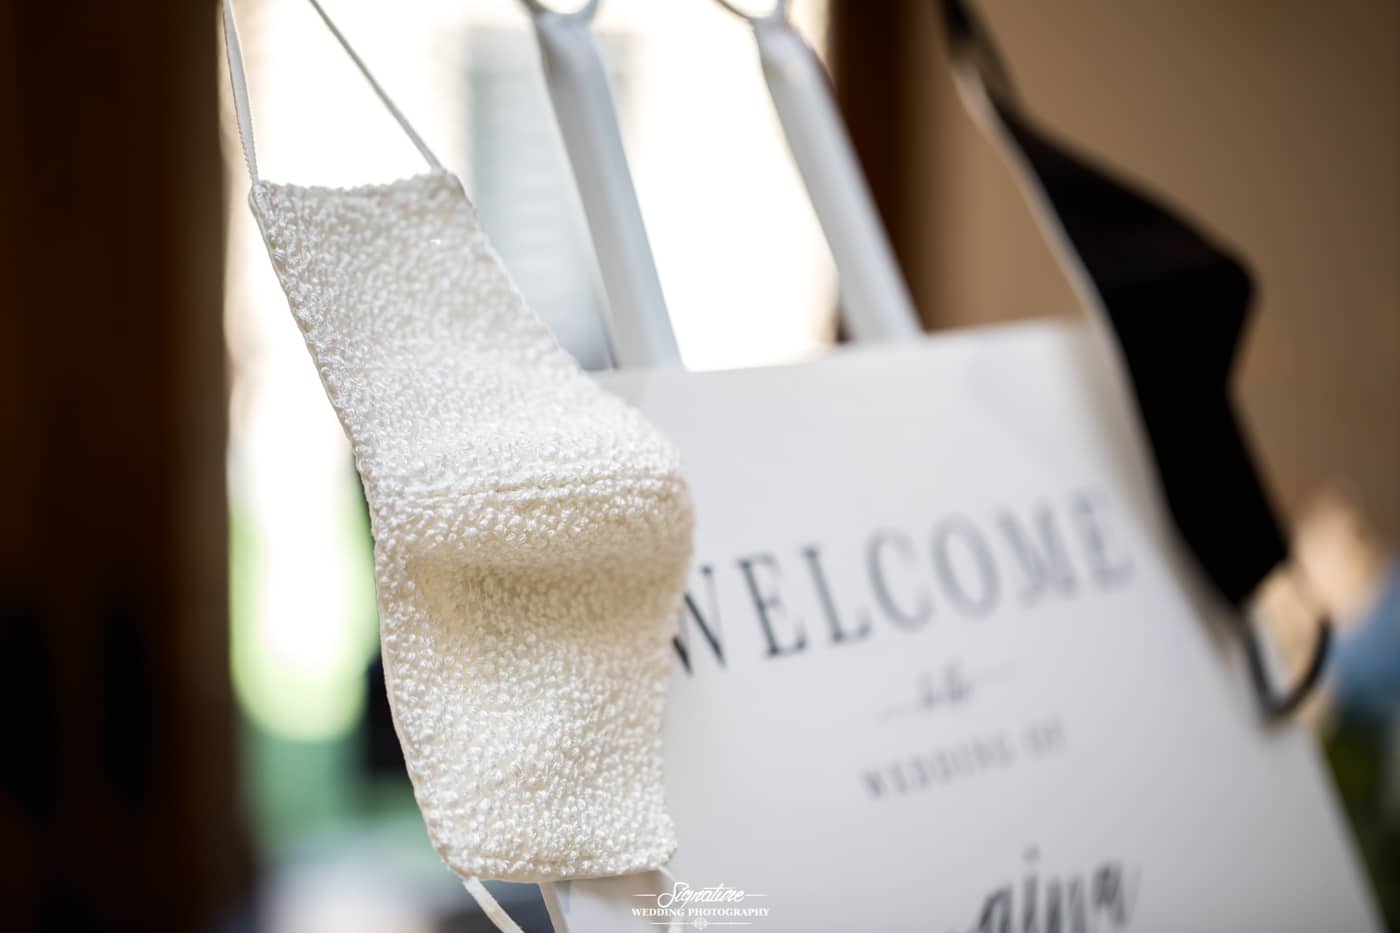 Wedding welcome sign with face masks